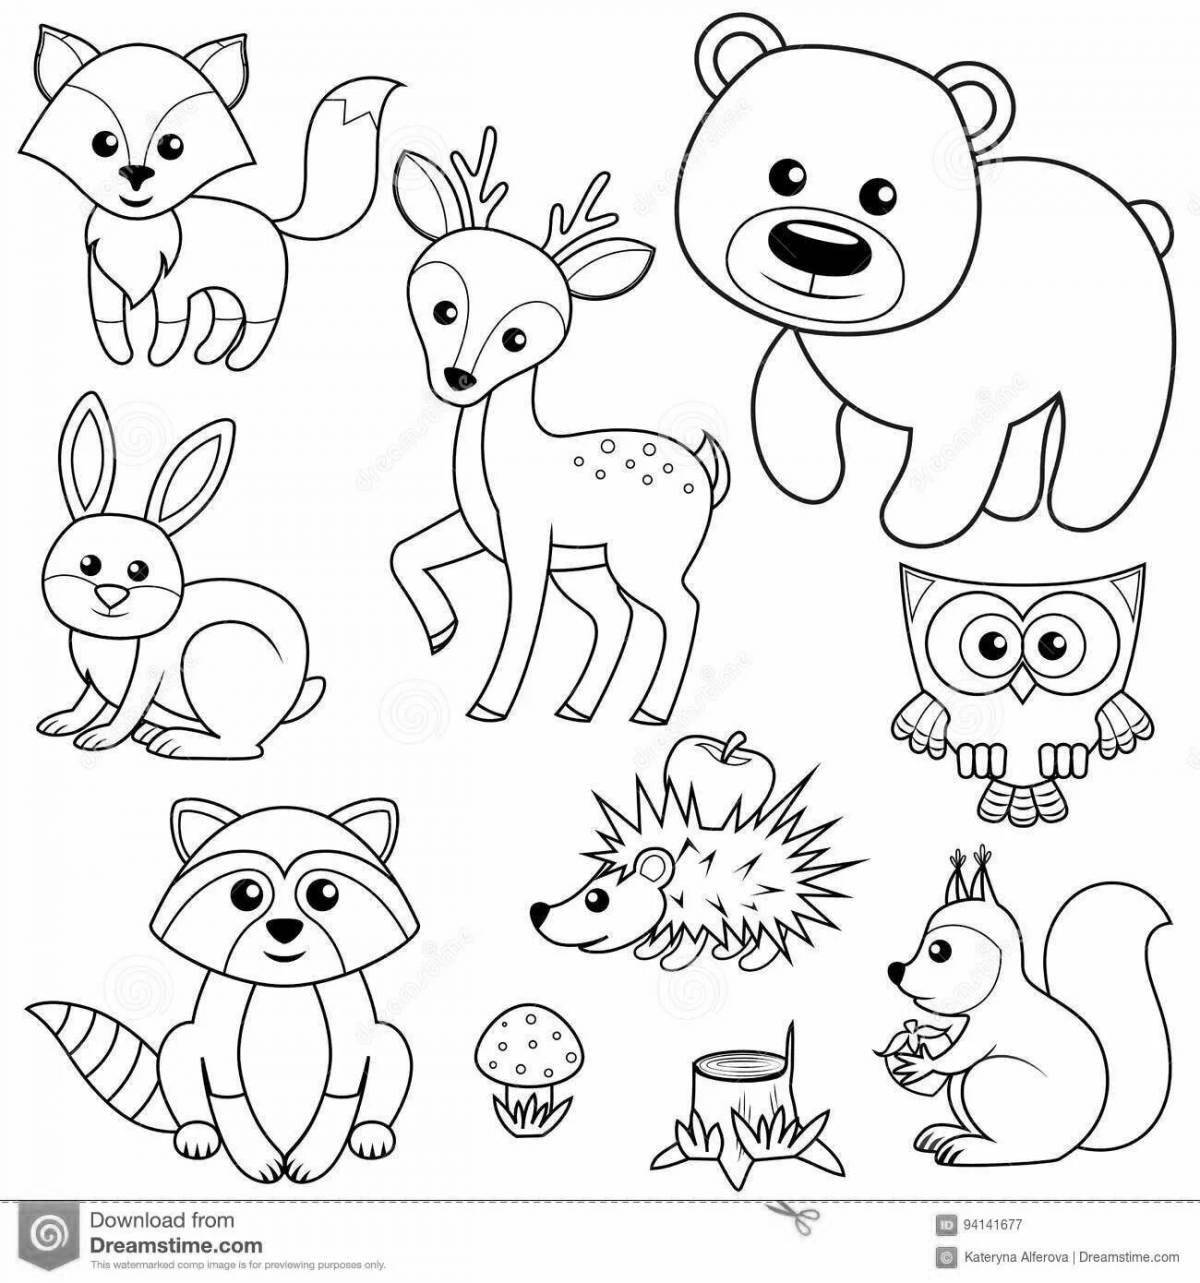 Adorable forest animal coloring book for kids